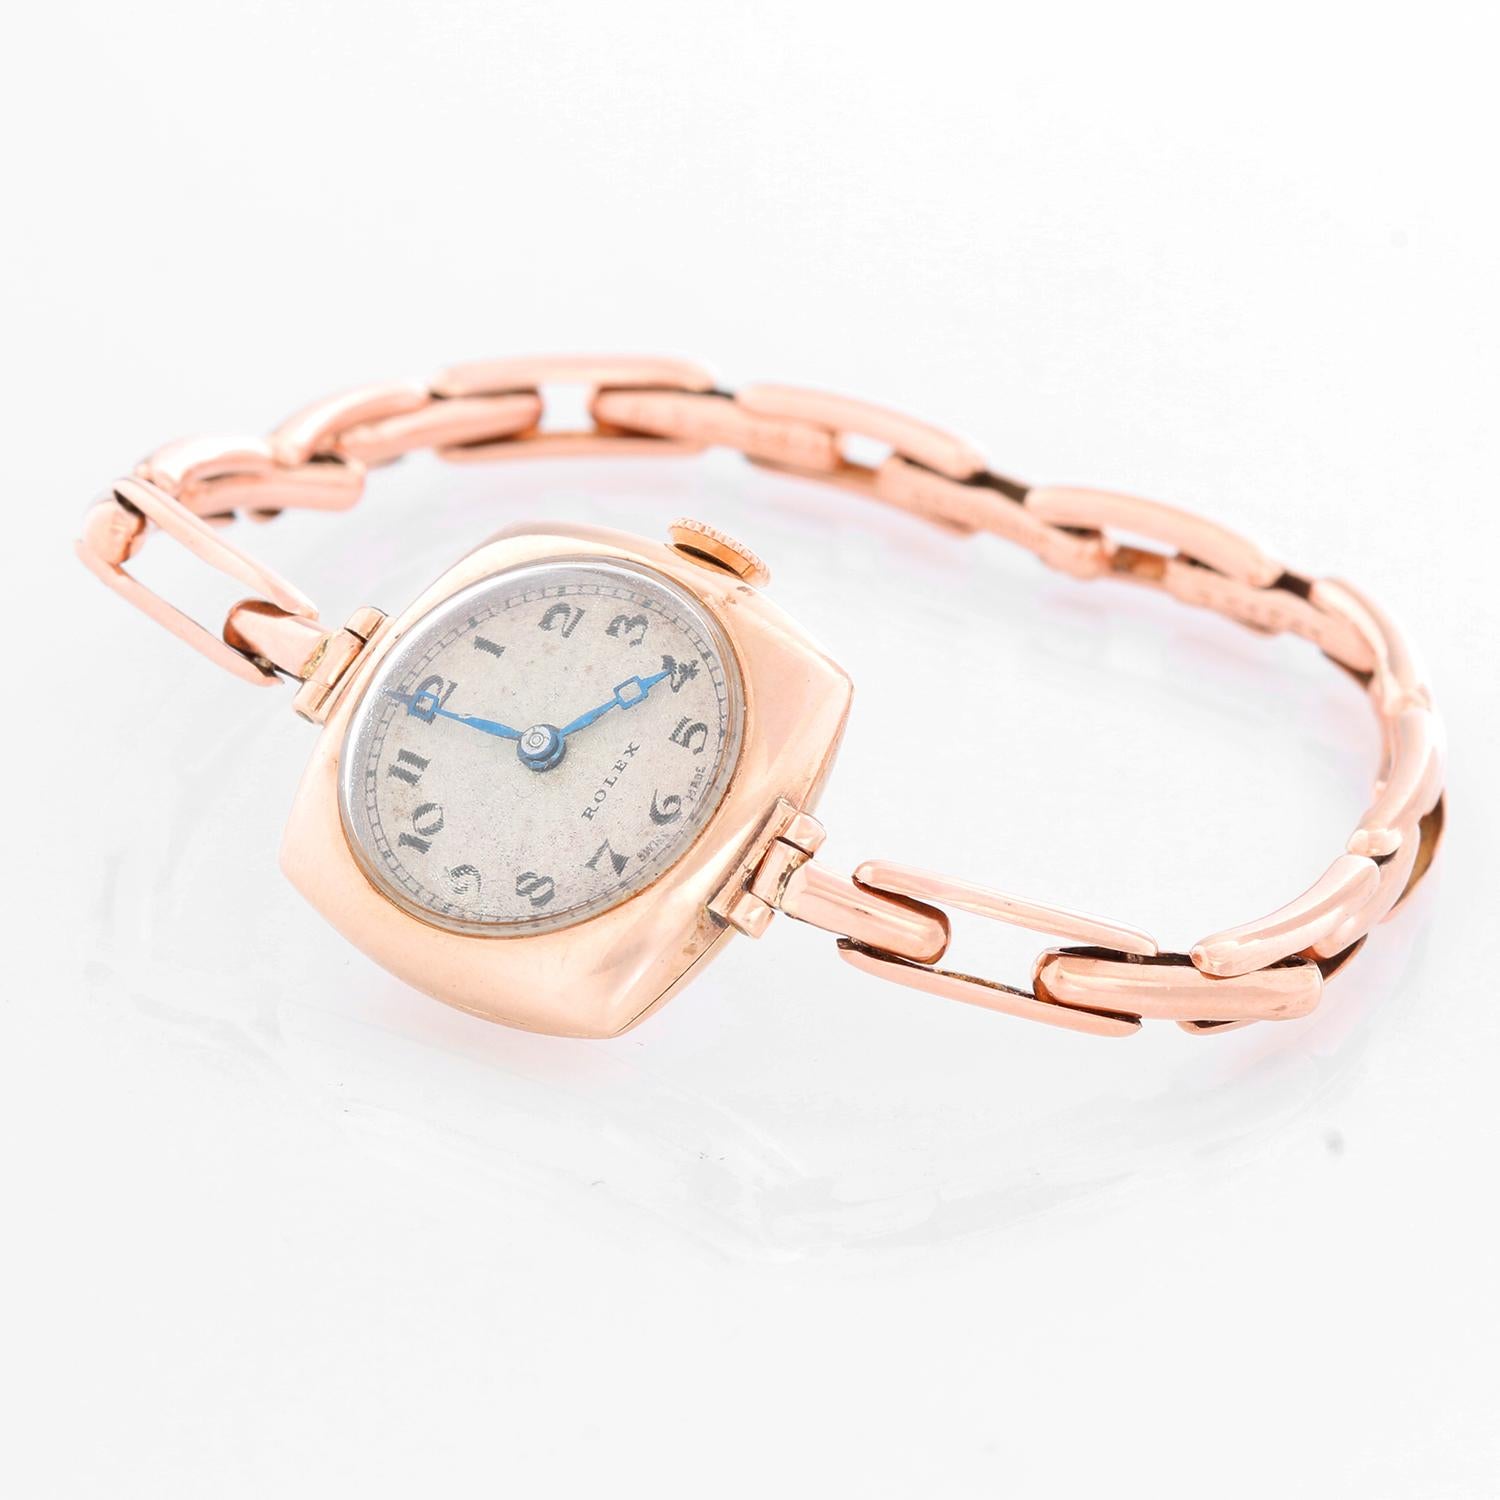 Rolex Cushion Shaped Oyster Rose Gold Watch - Manual winding. Rose gold ( 20 x 20 mm ). Ivory Guilloche dial with Arabic numerals and blue Breguet hands. Rose gold link stretchy bracelet; will fit up to a 7 1/4 inch wrist. Pre-owned with custom box.